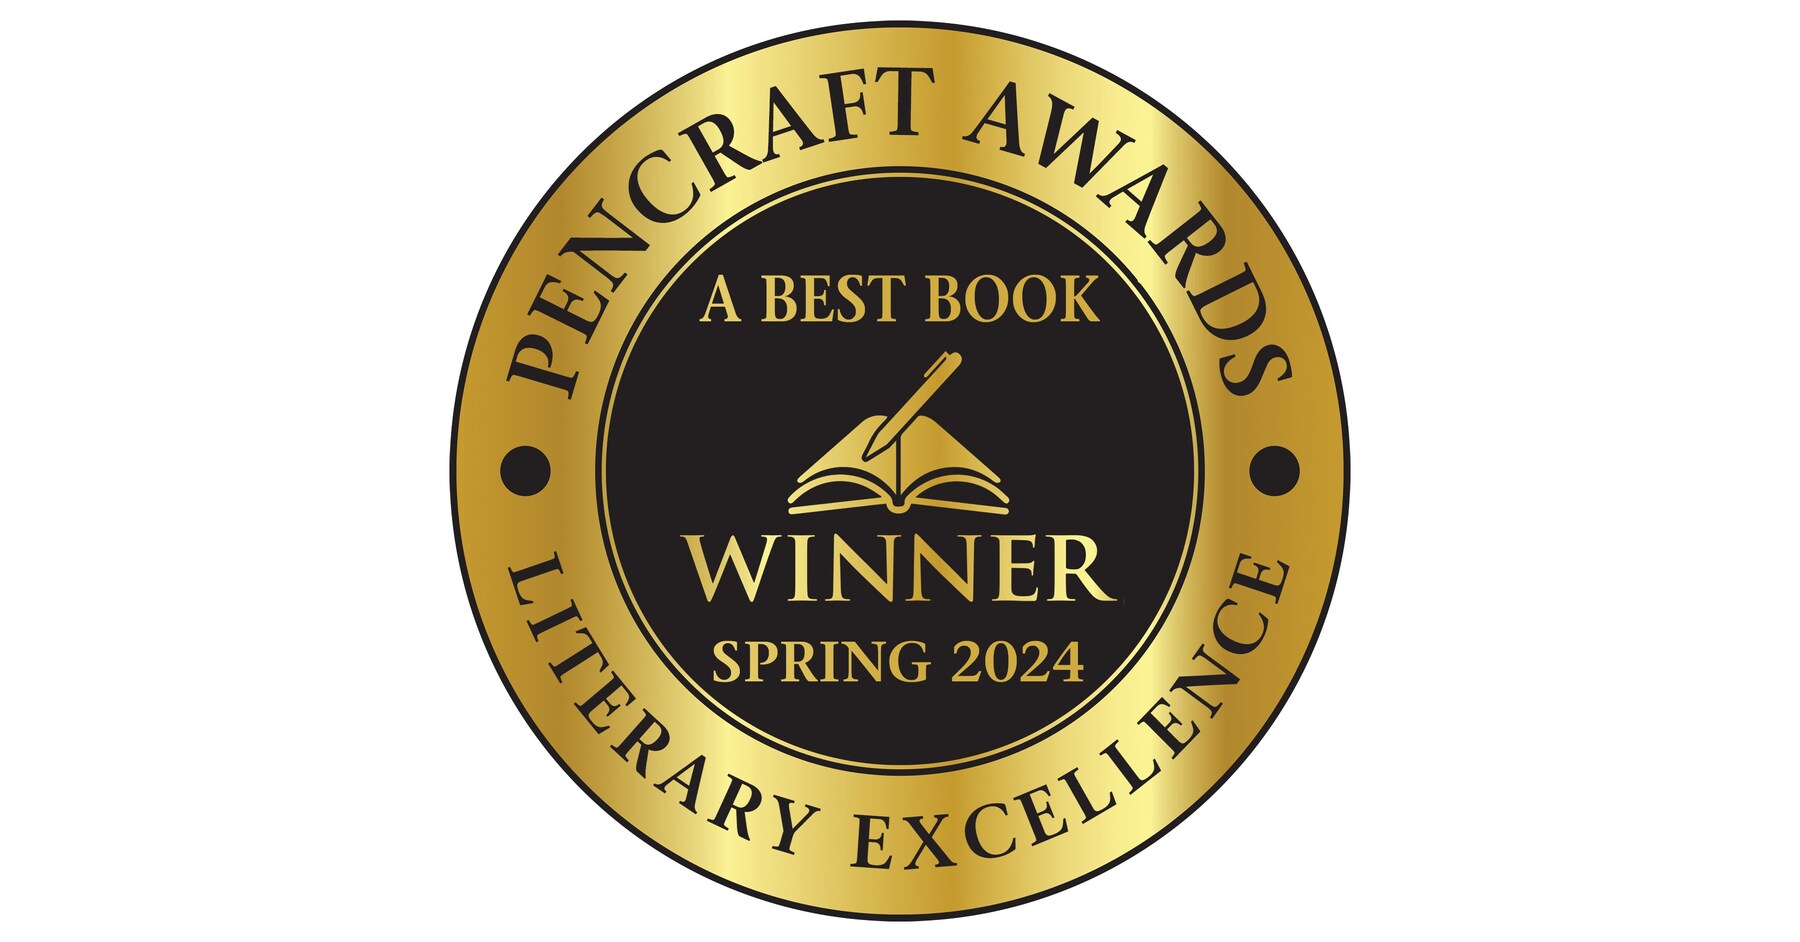 The PenCraft Seasonal Book Awards for Spring 2024 recognize 64 outstanding works.